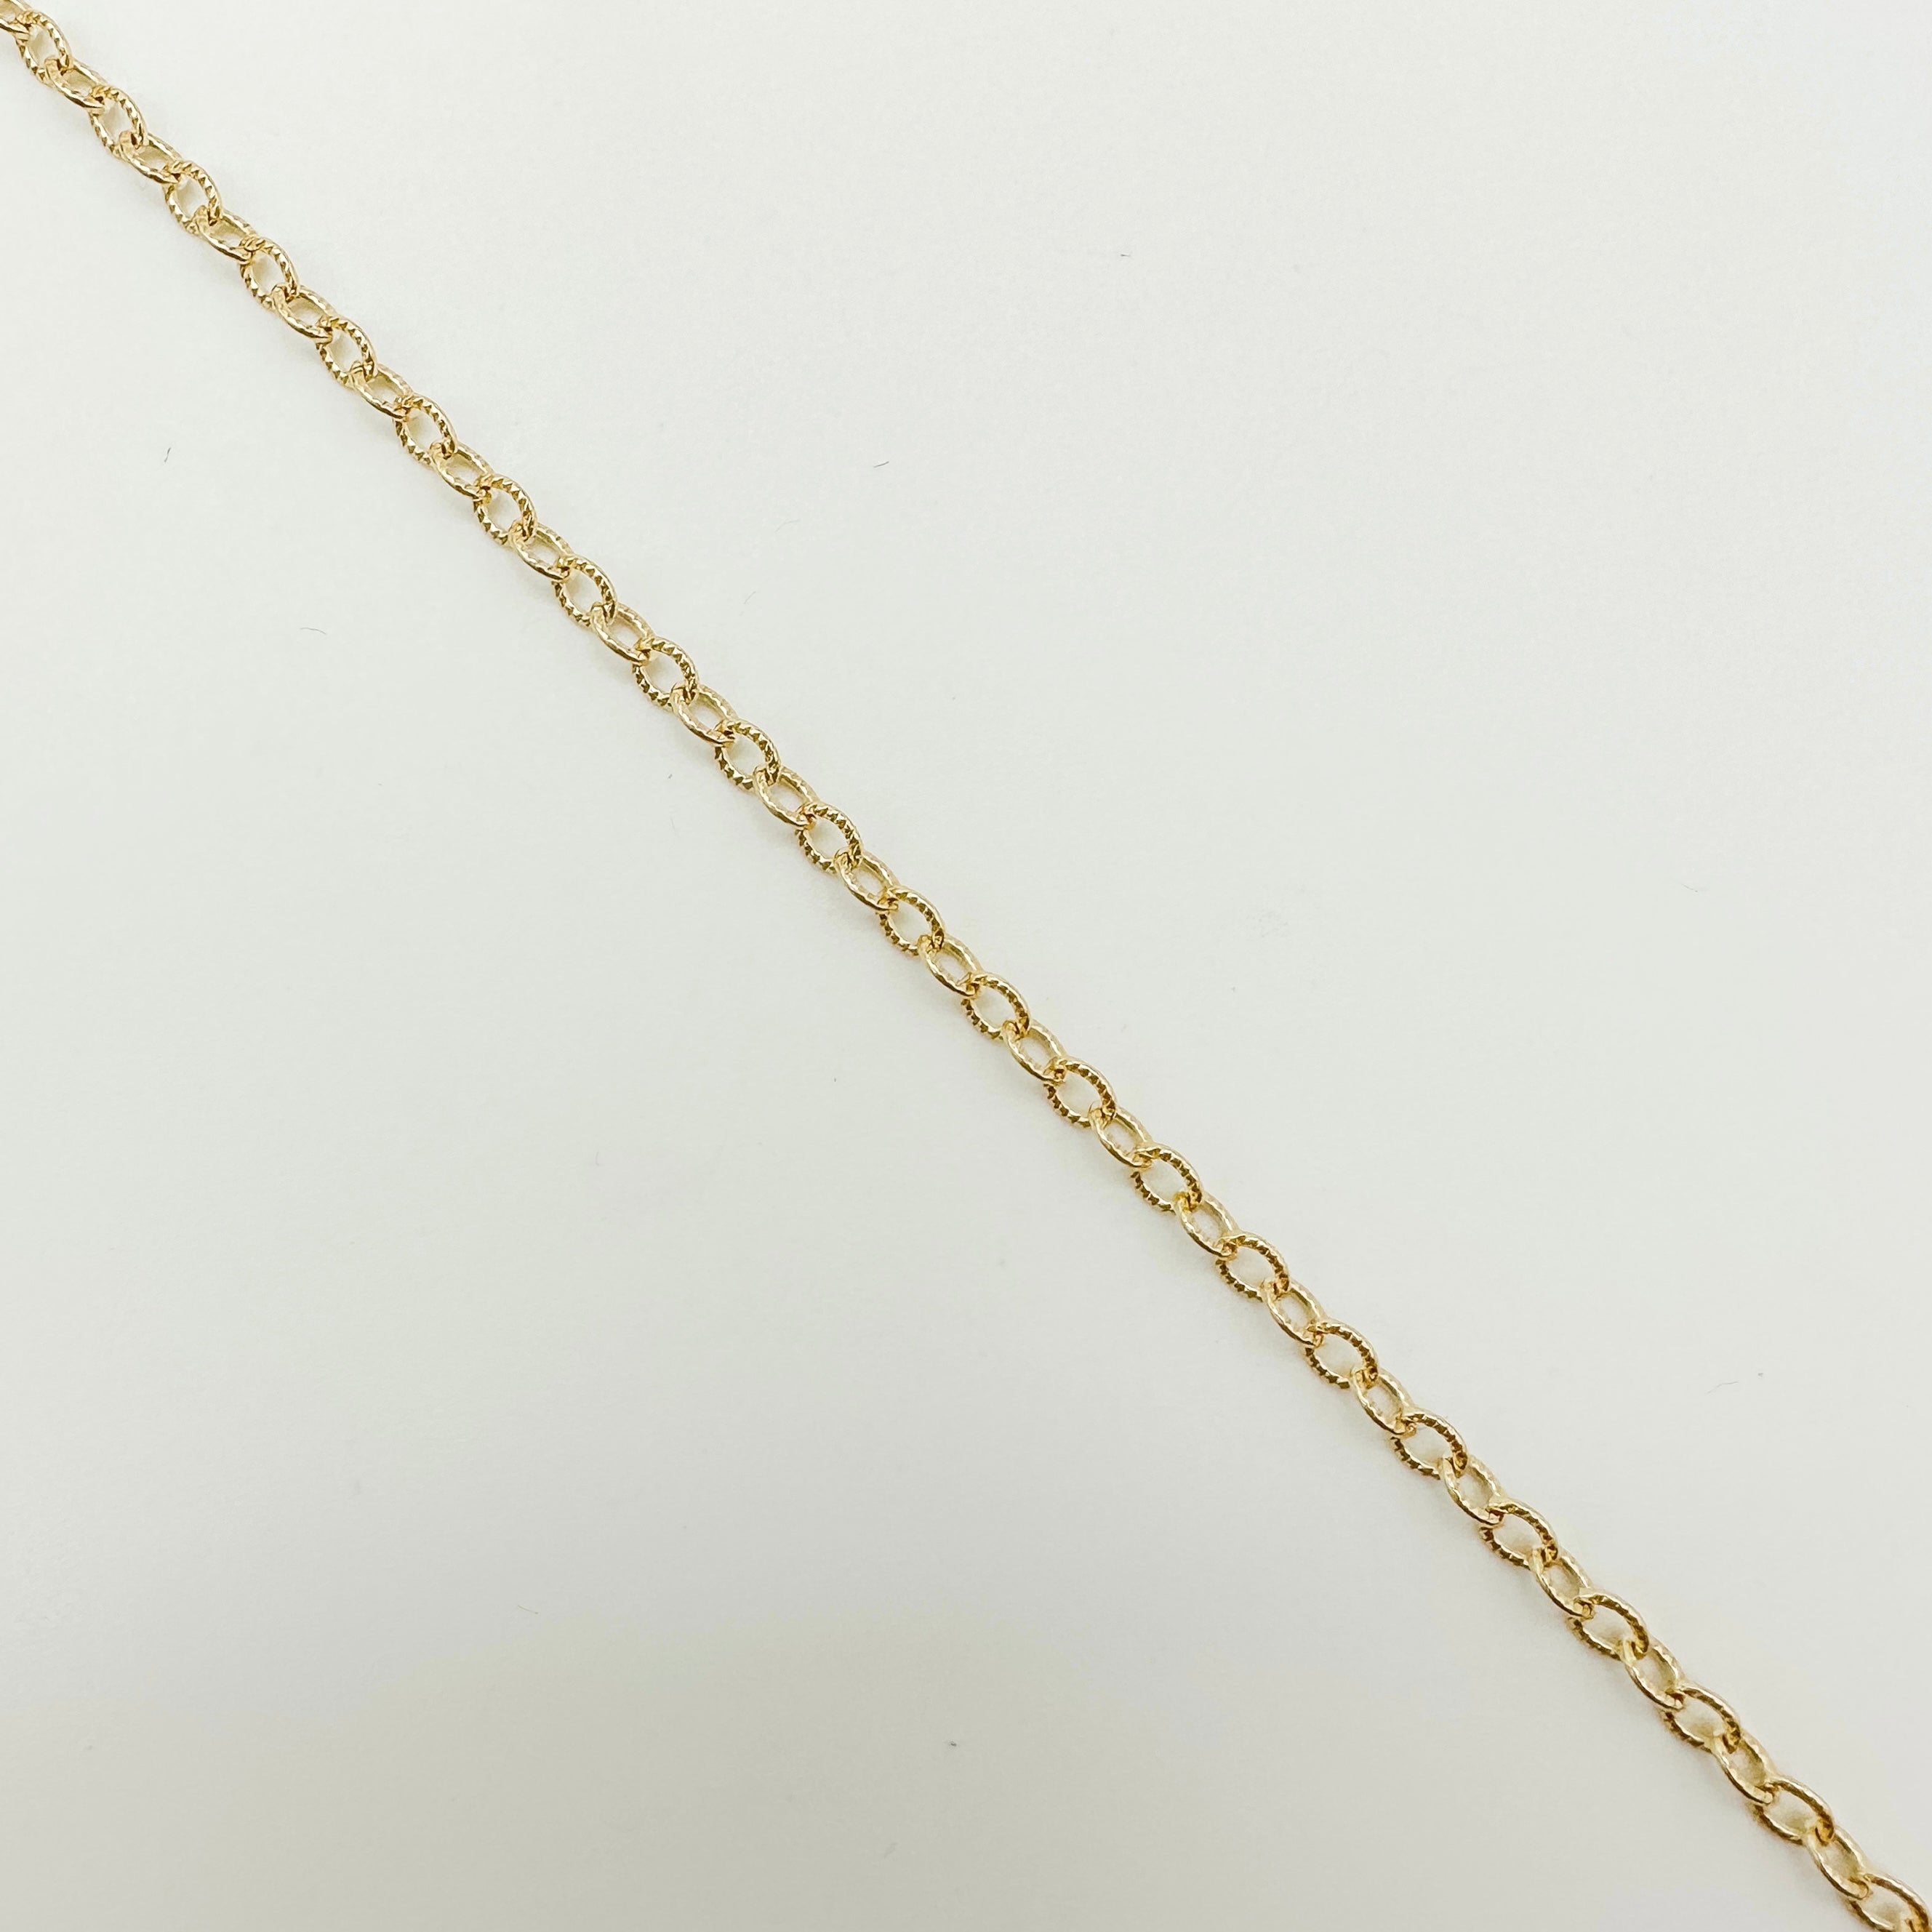 textured cable chain / gold-filled chain by the foot / wholesale chain / permanent jewelry supplies / gold-filled cable chain